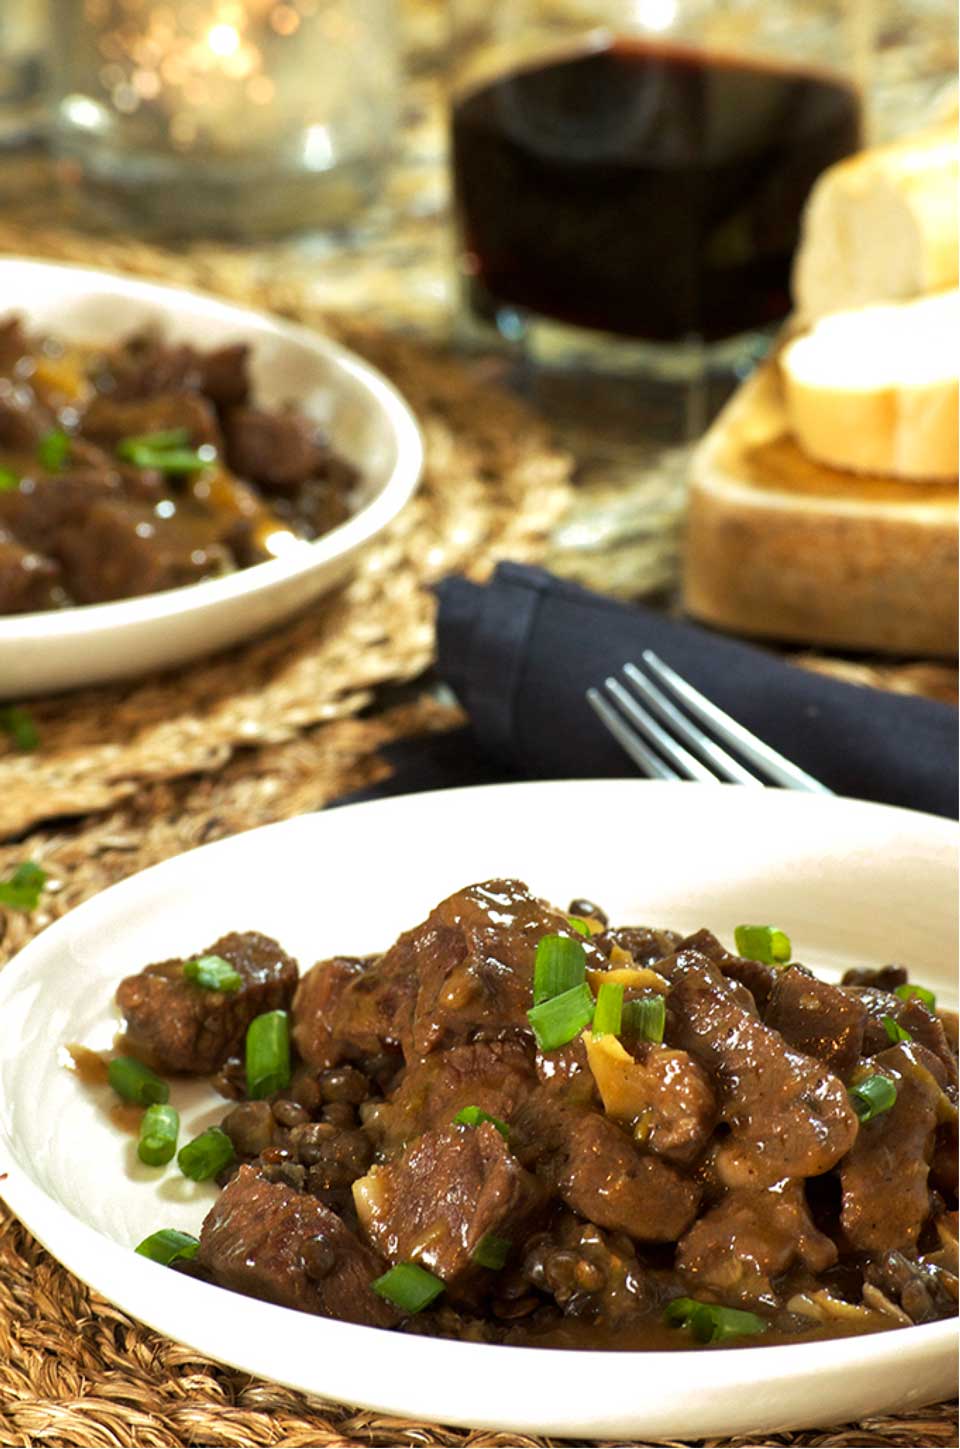 One great way to make beef stew a bit healthier is to add in lots of antioxidant-rich vegetables or fiber-loaded legumes. This Instant Pot Ginger-Soy Beef Stew over Lentils from Dan at Instant Pot Family Recipes is just one of the great examples we’ve got for you!